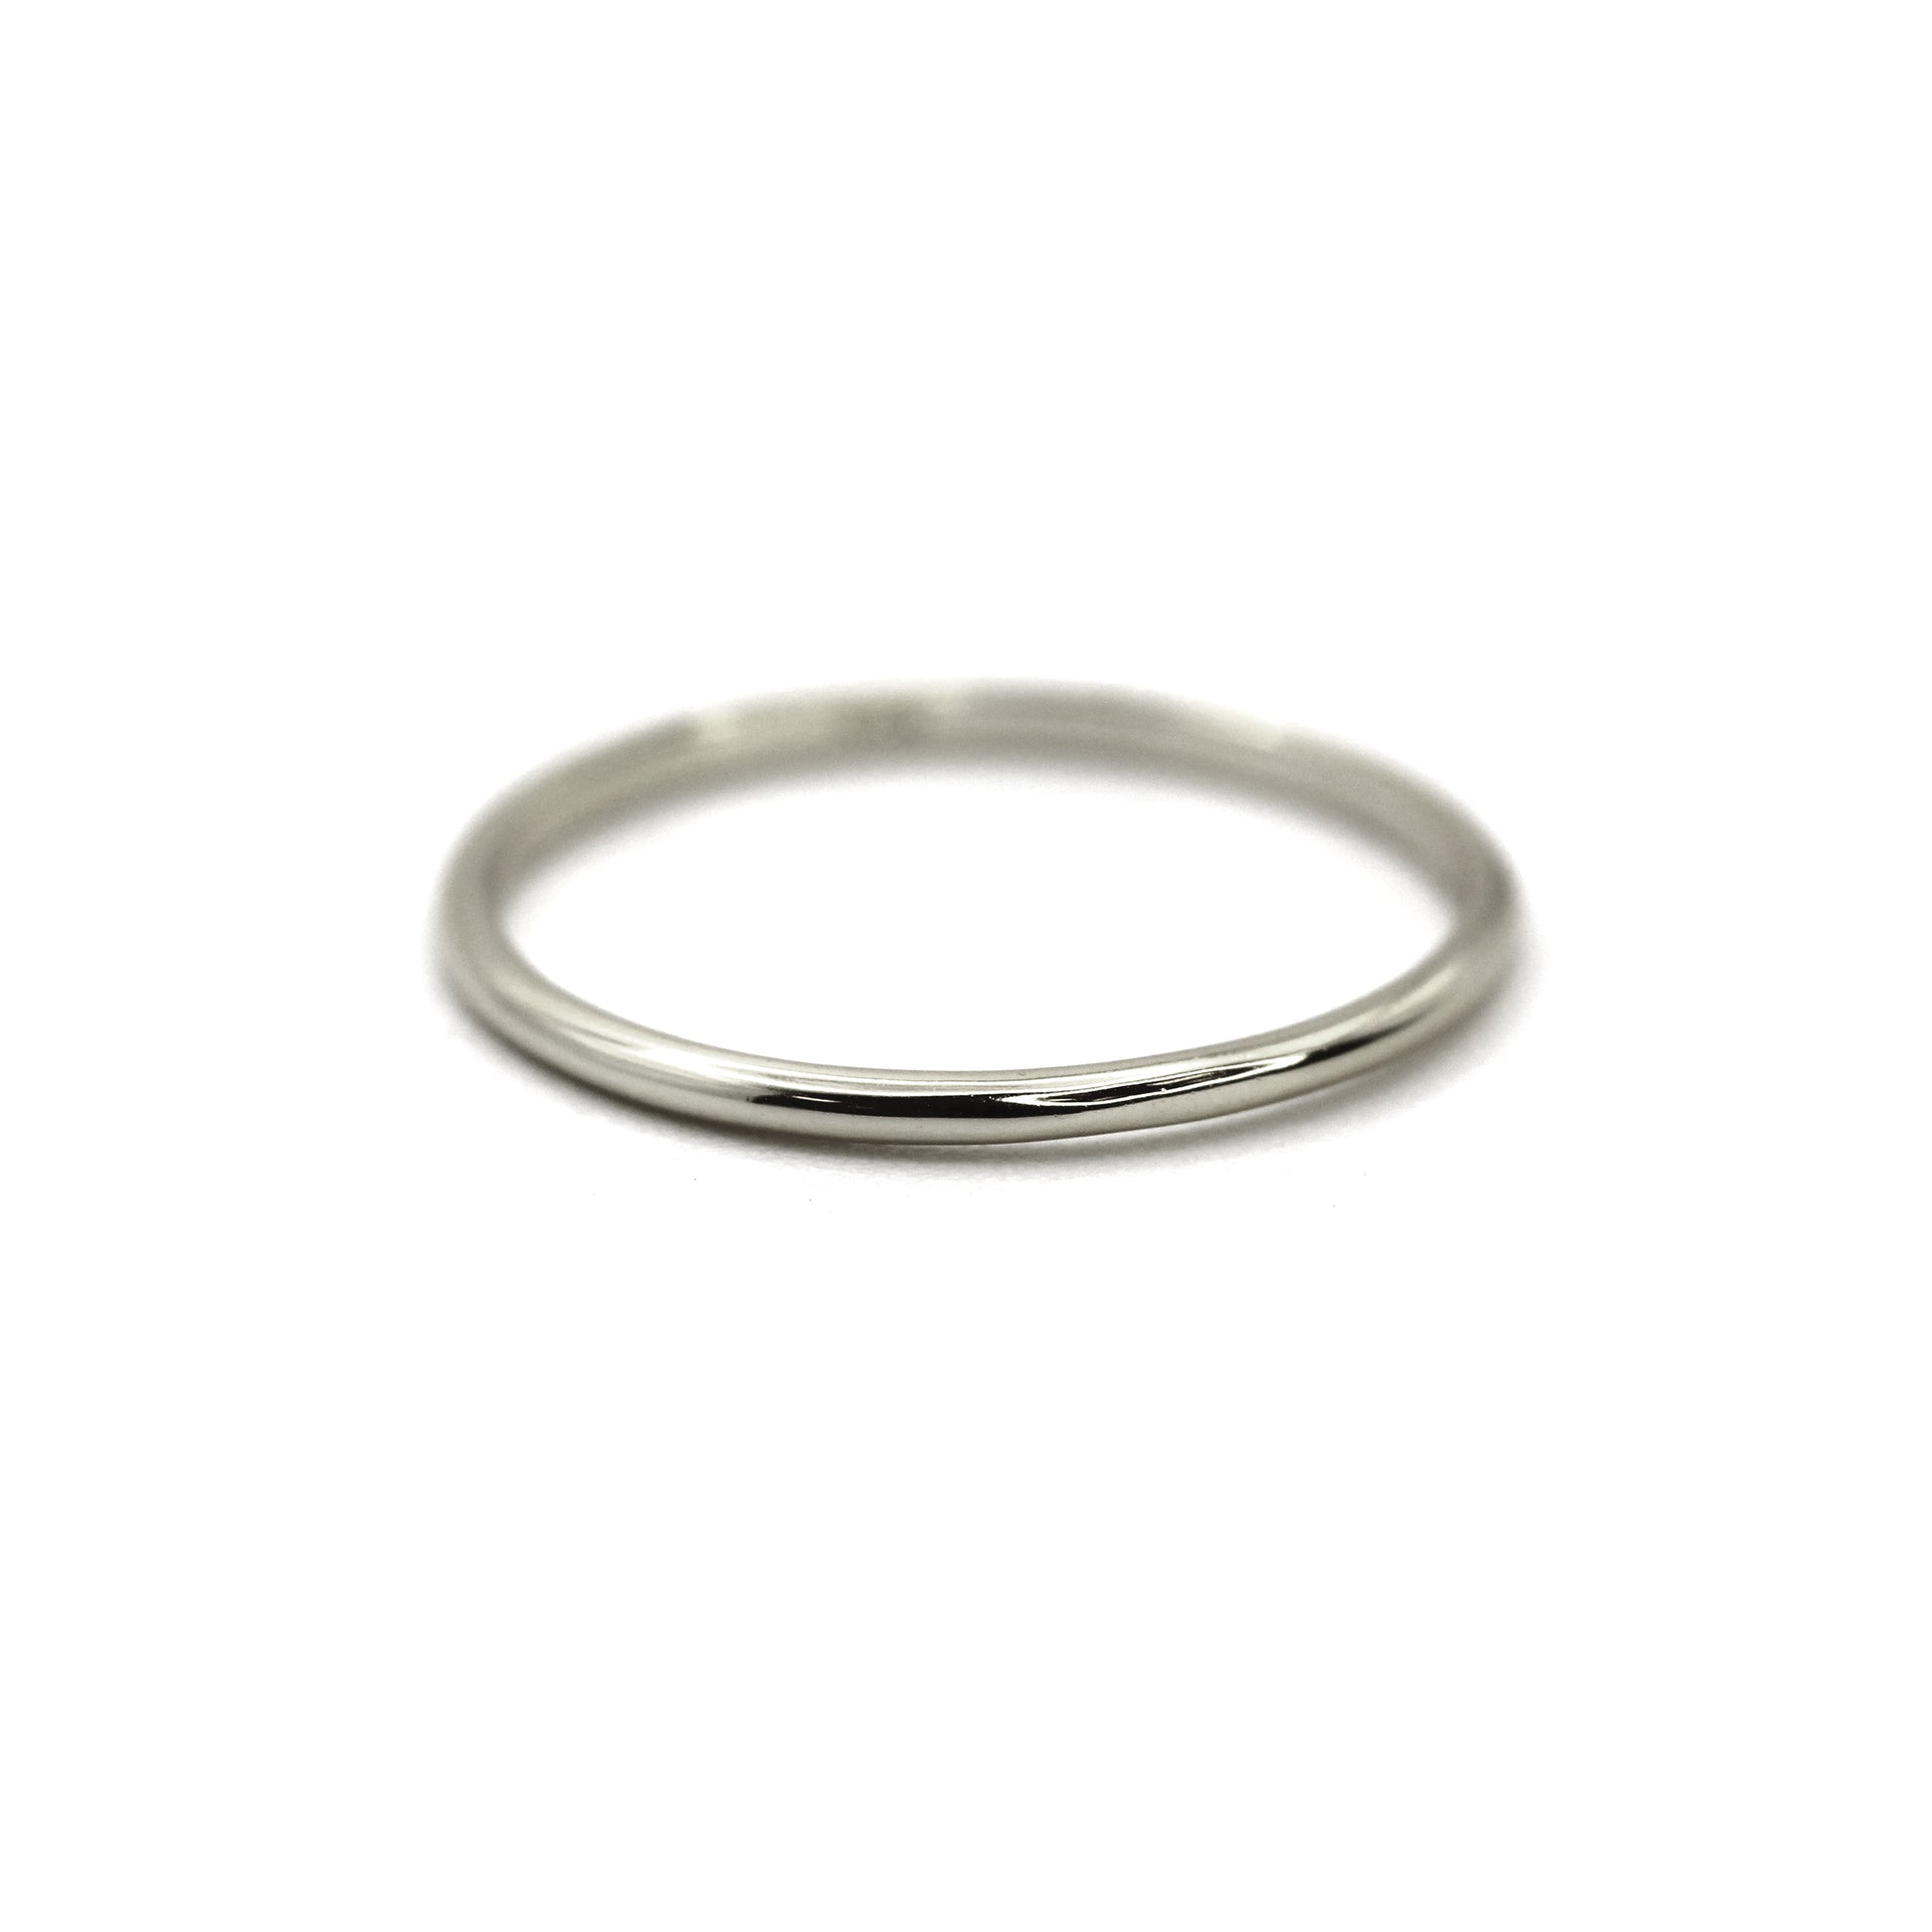 14k Simple Stacking Gold Ring by handmade.